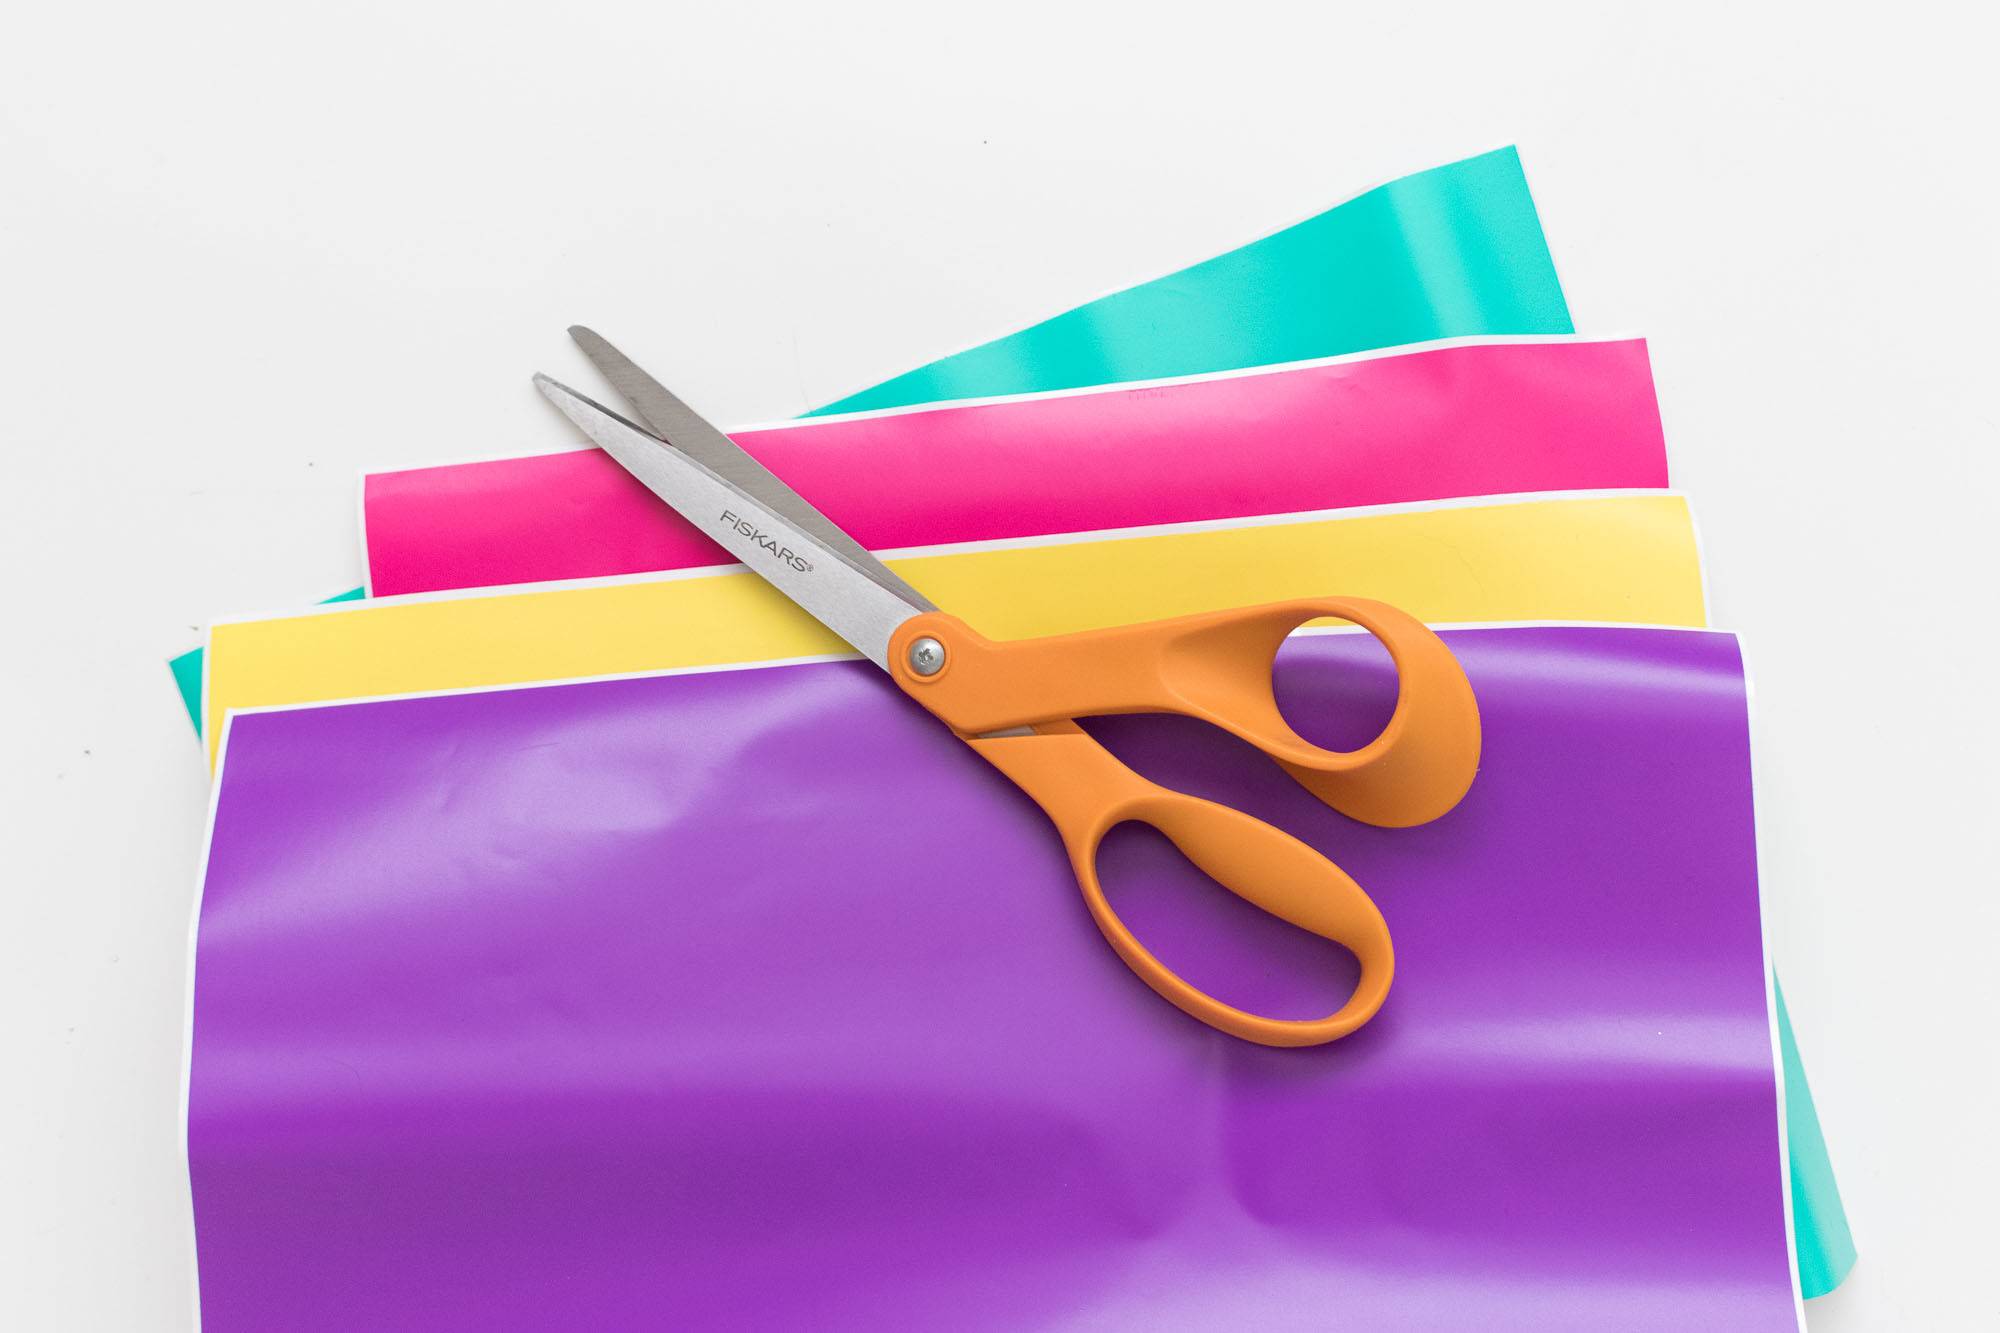 Orange handled scissors sit on different colored sheets of material.